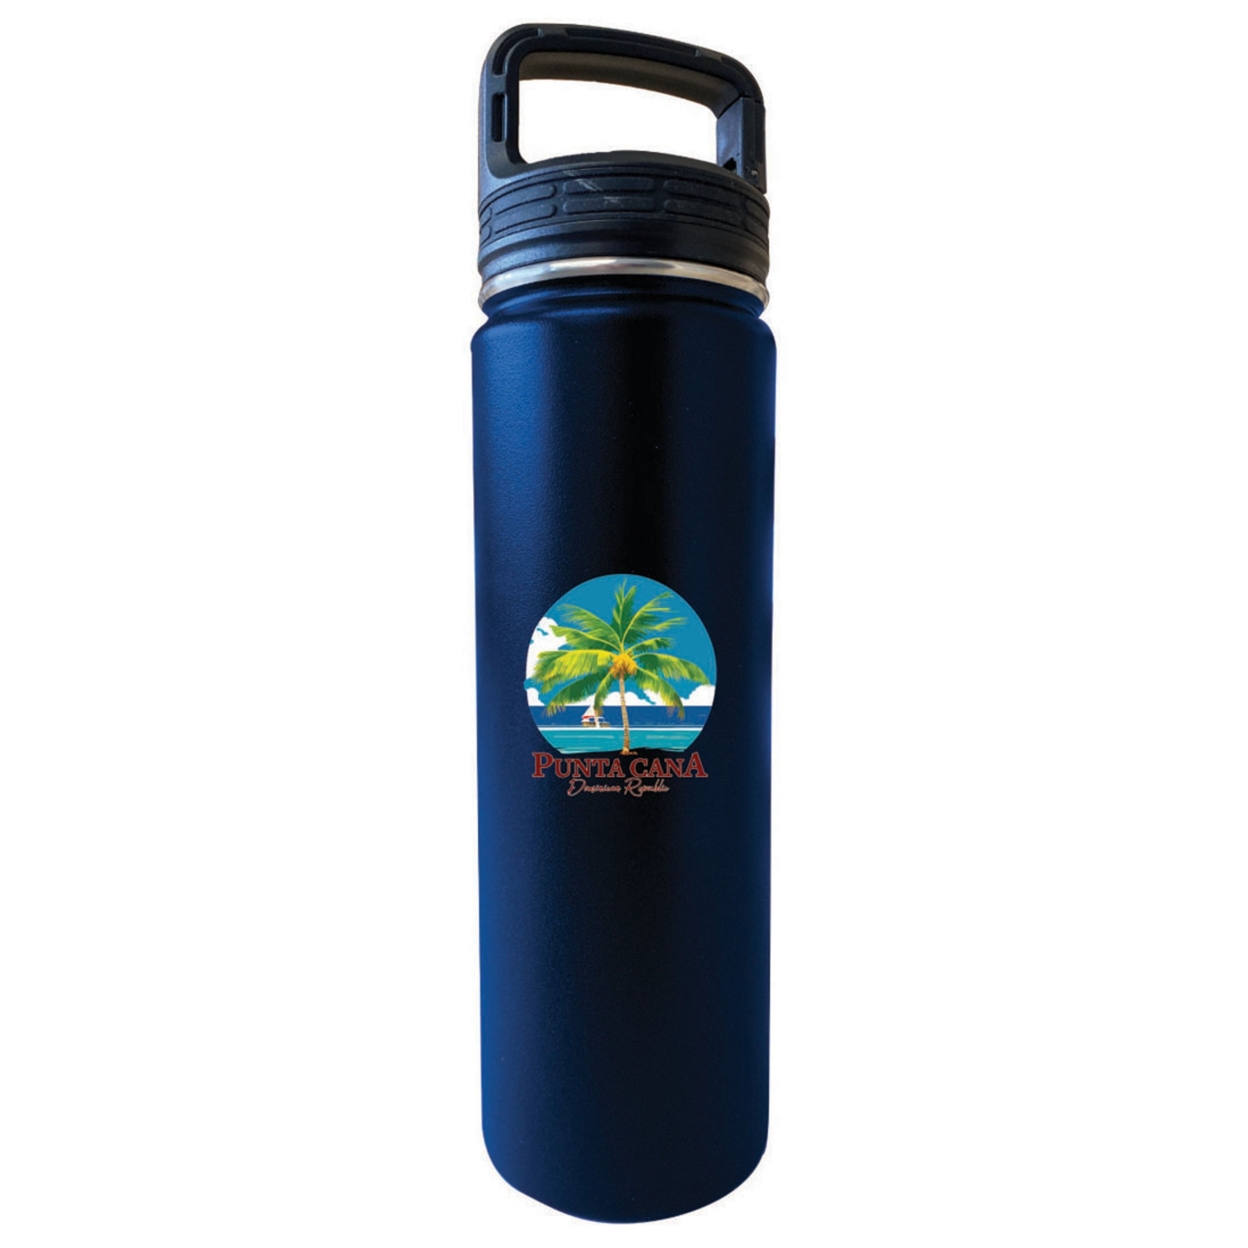 Punta Cana Dominican Republic Souvenir 32 Oz Insulated Stainless Steel Tumbler - Navy, Palm 3